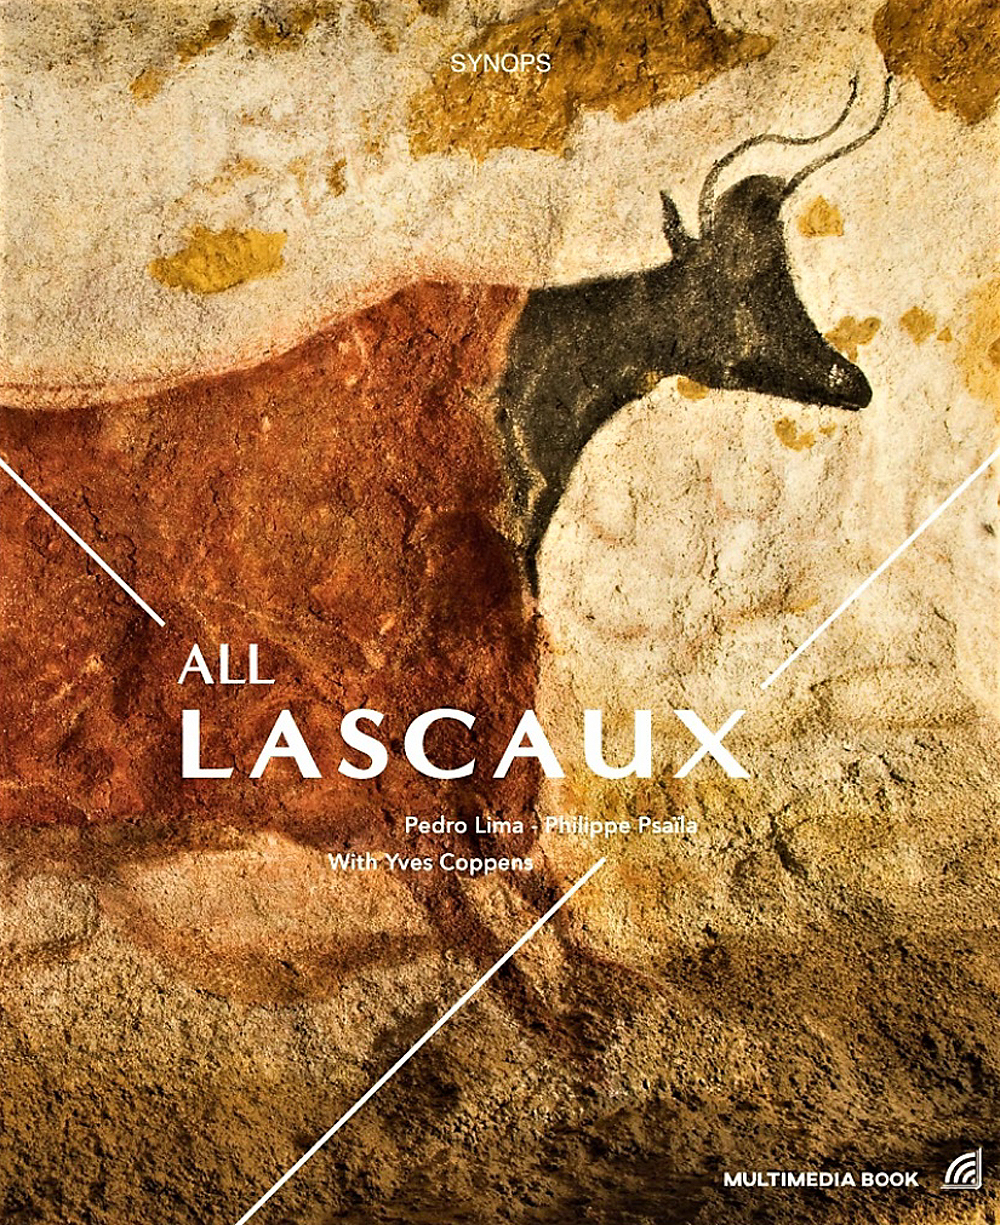 New publication: All Lascaux by Pedro Lima and Philippe Psaïla, with Yves Coppens